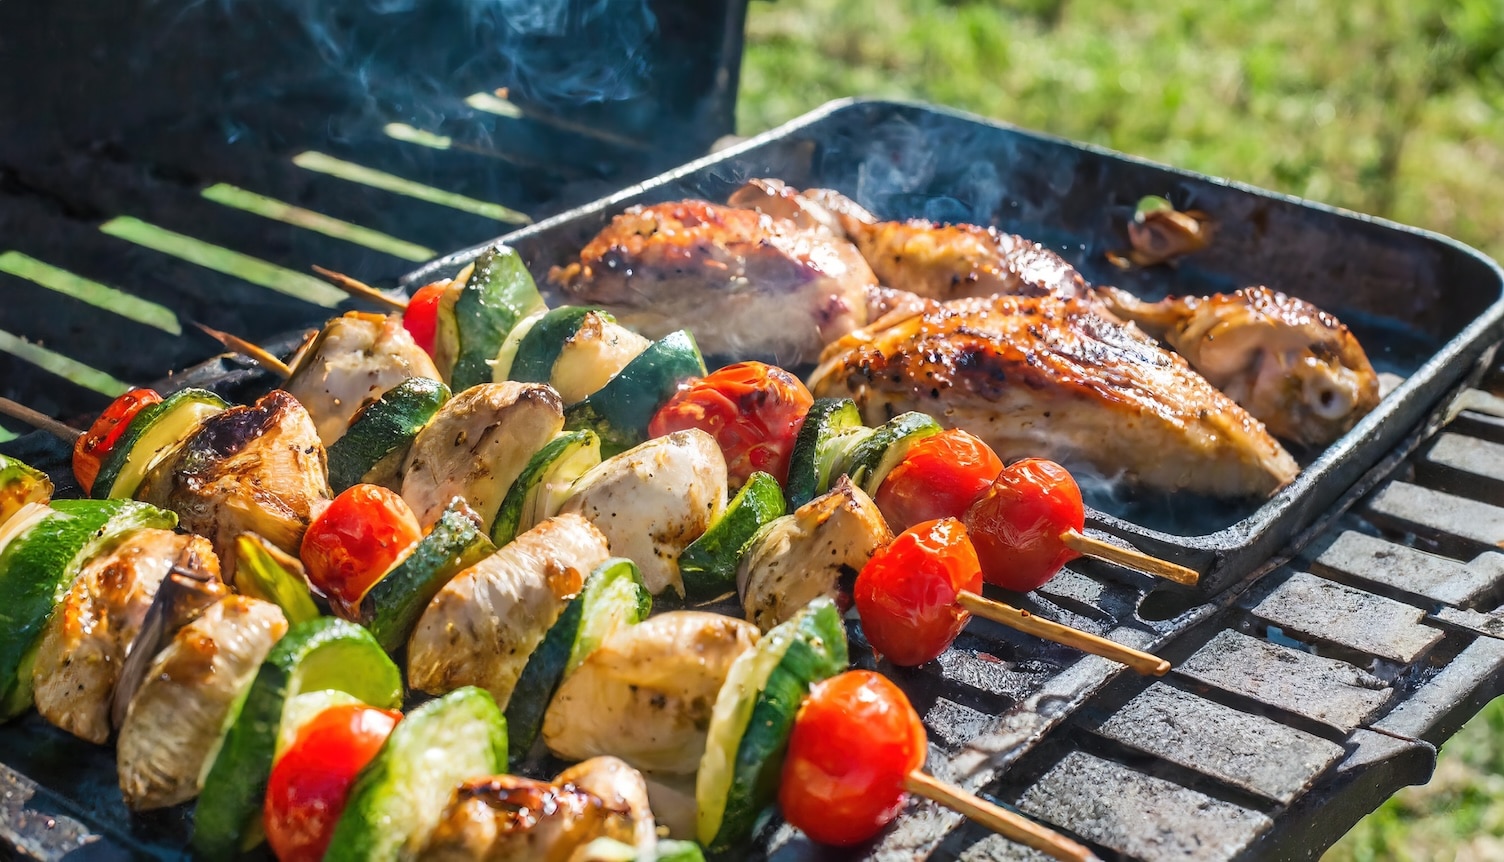 Healthy Grilling Tips | MyFitnessPal